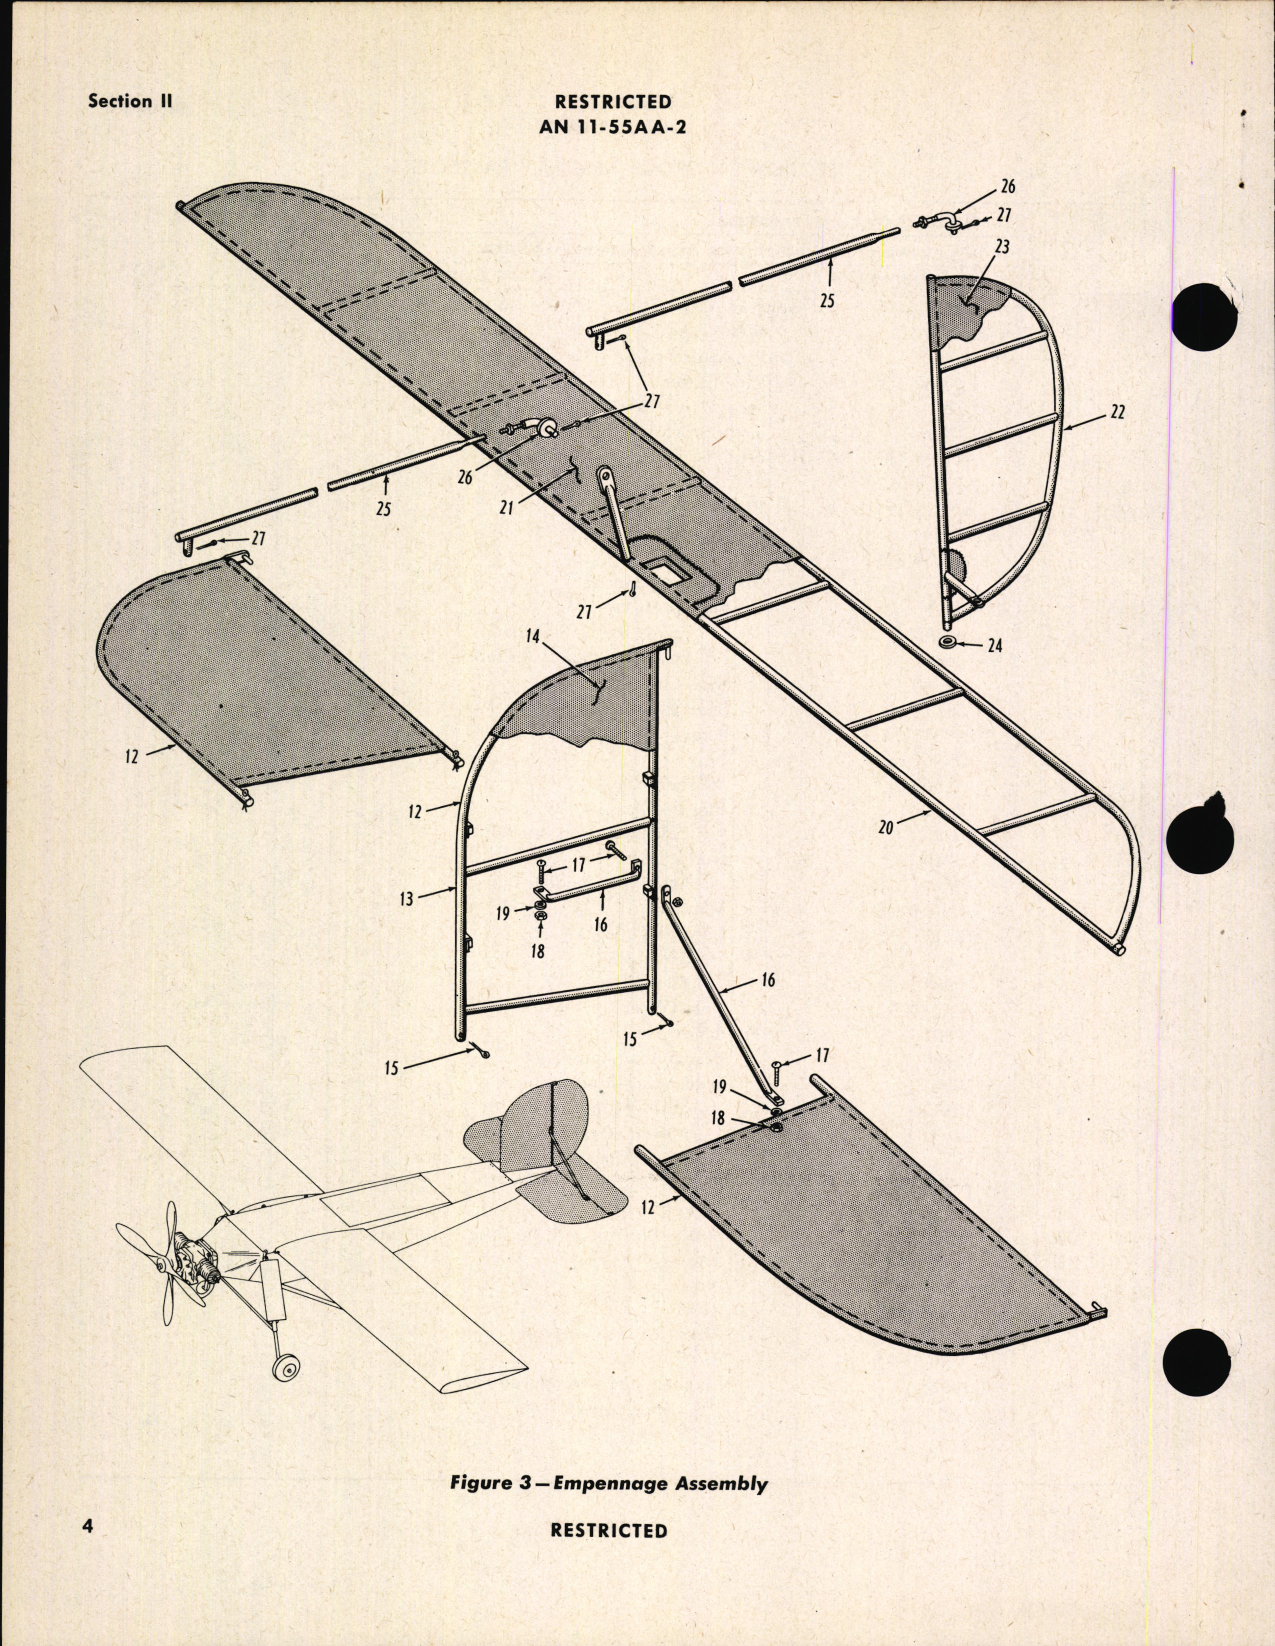 Sample page 8 from AirCorps Library document: Parts Catalog for Army Models OQ-2A, OQ-2B, and Navy Model TTD-1